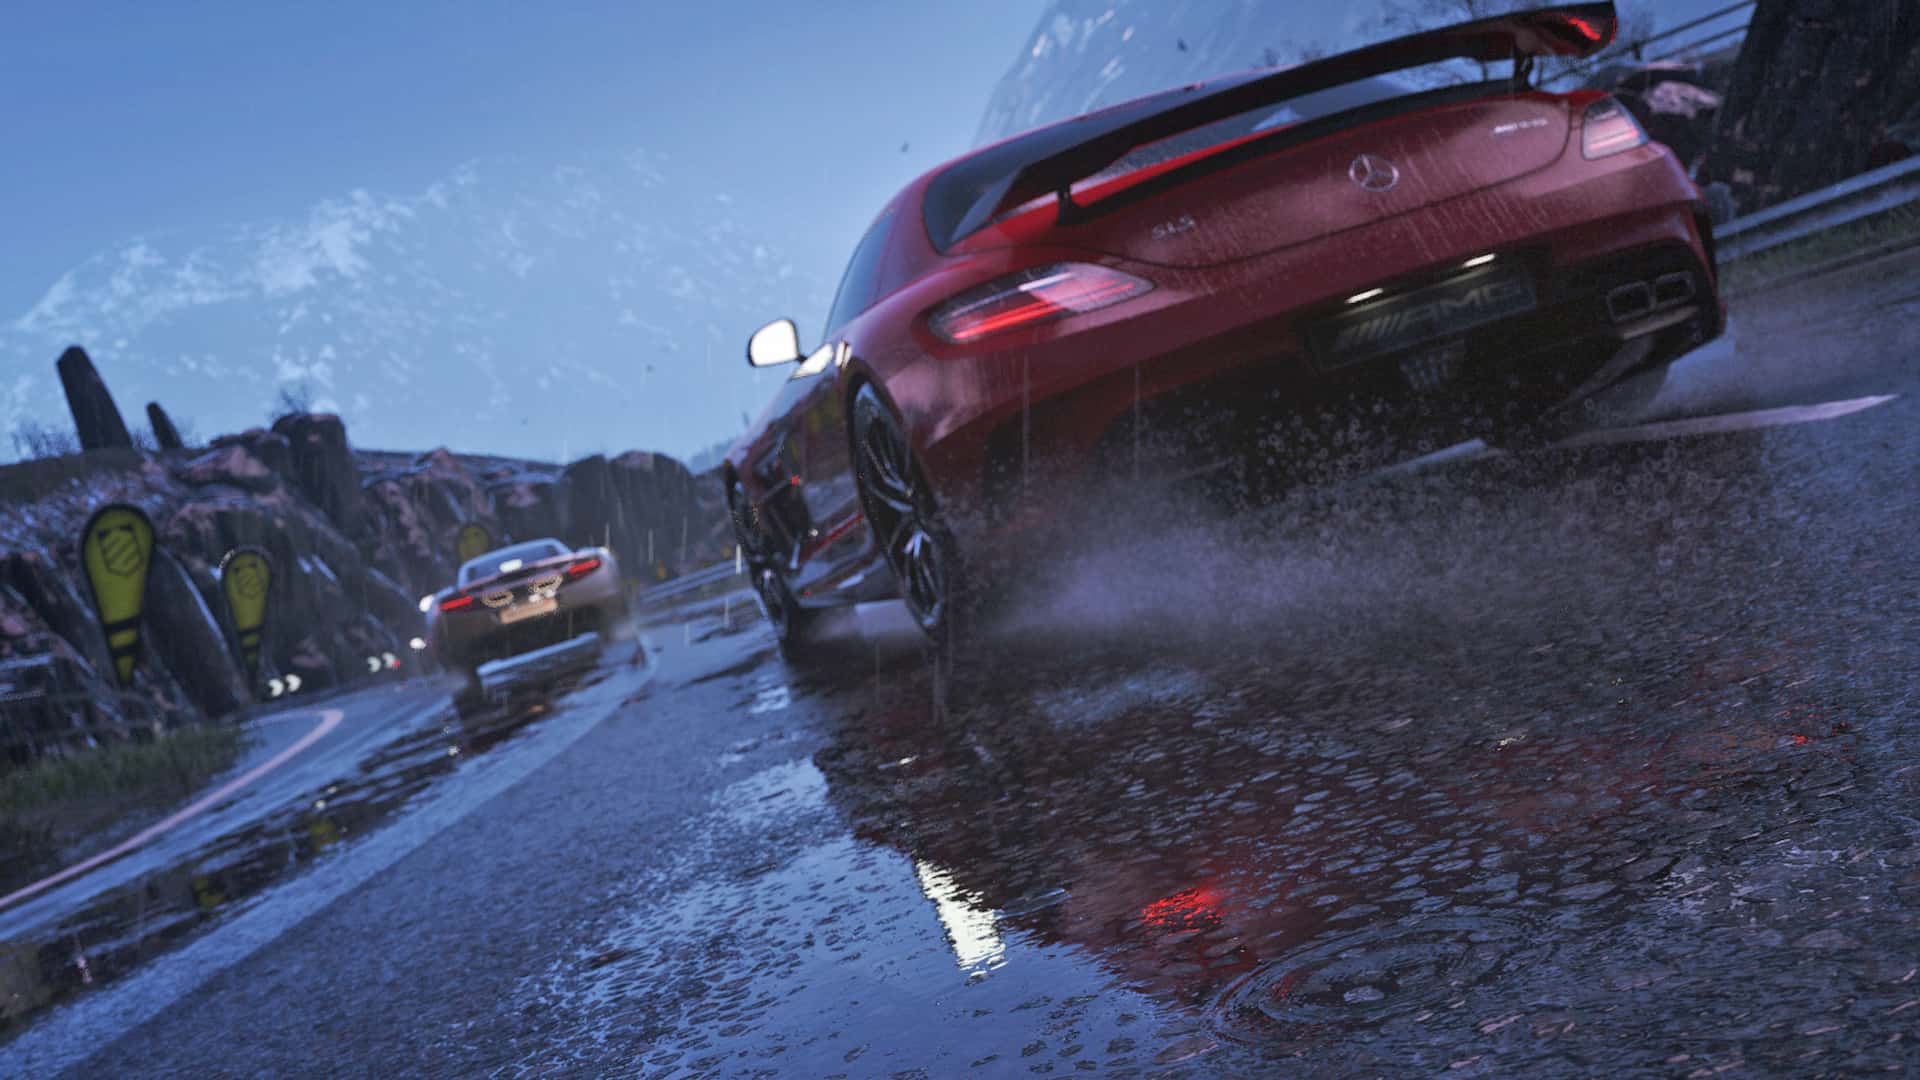 Former Motorstorm, Driveclub, DIRT 5 studio now working on Need for Speed